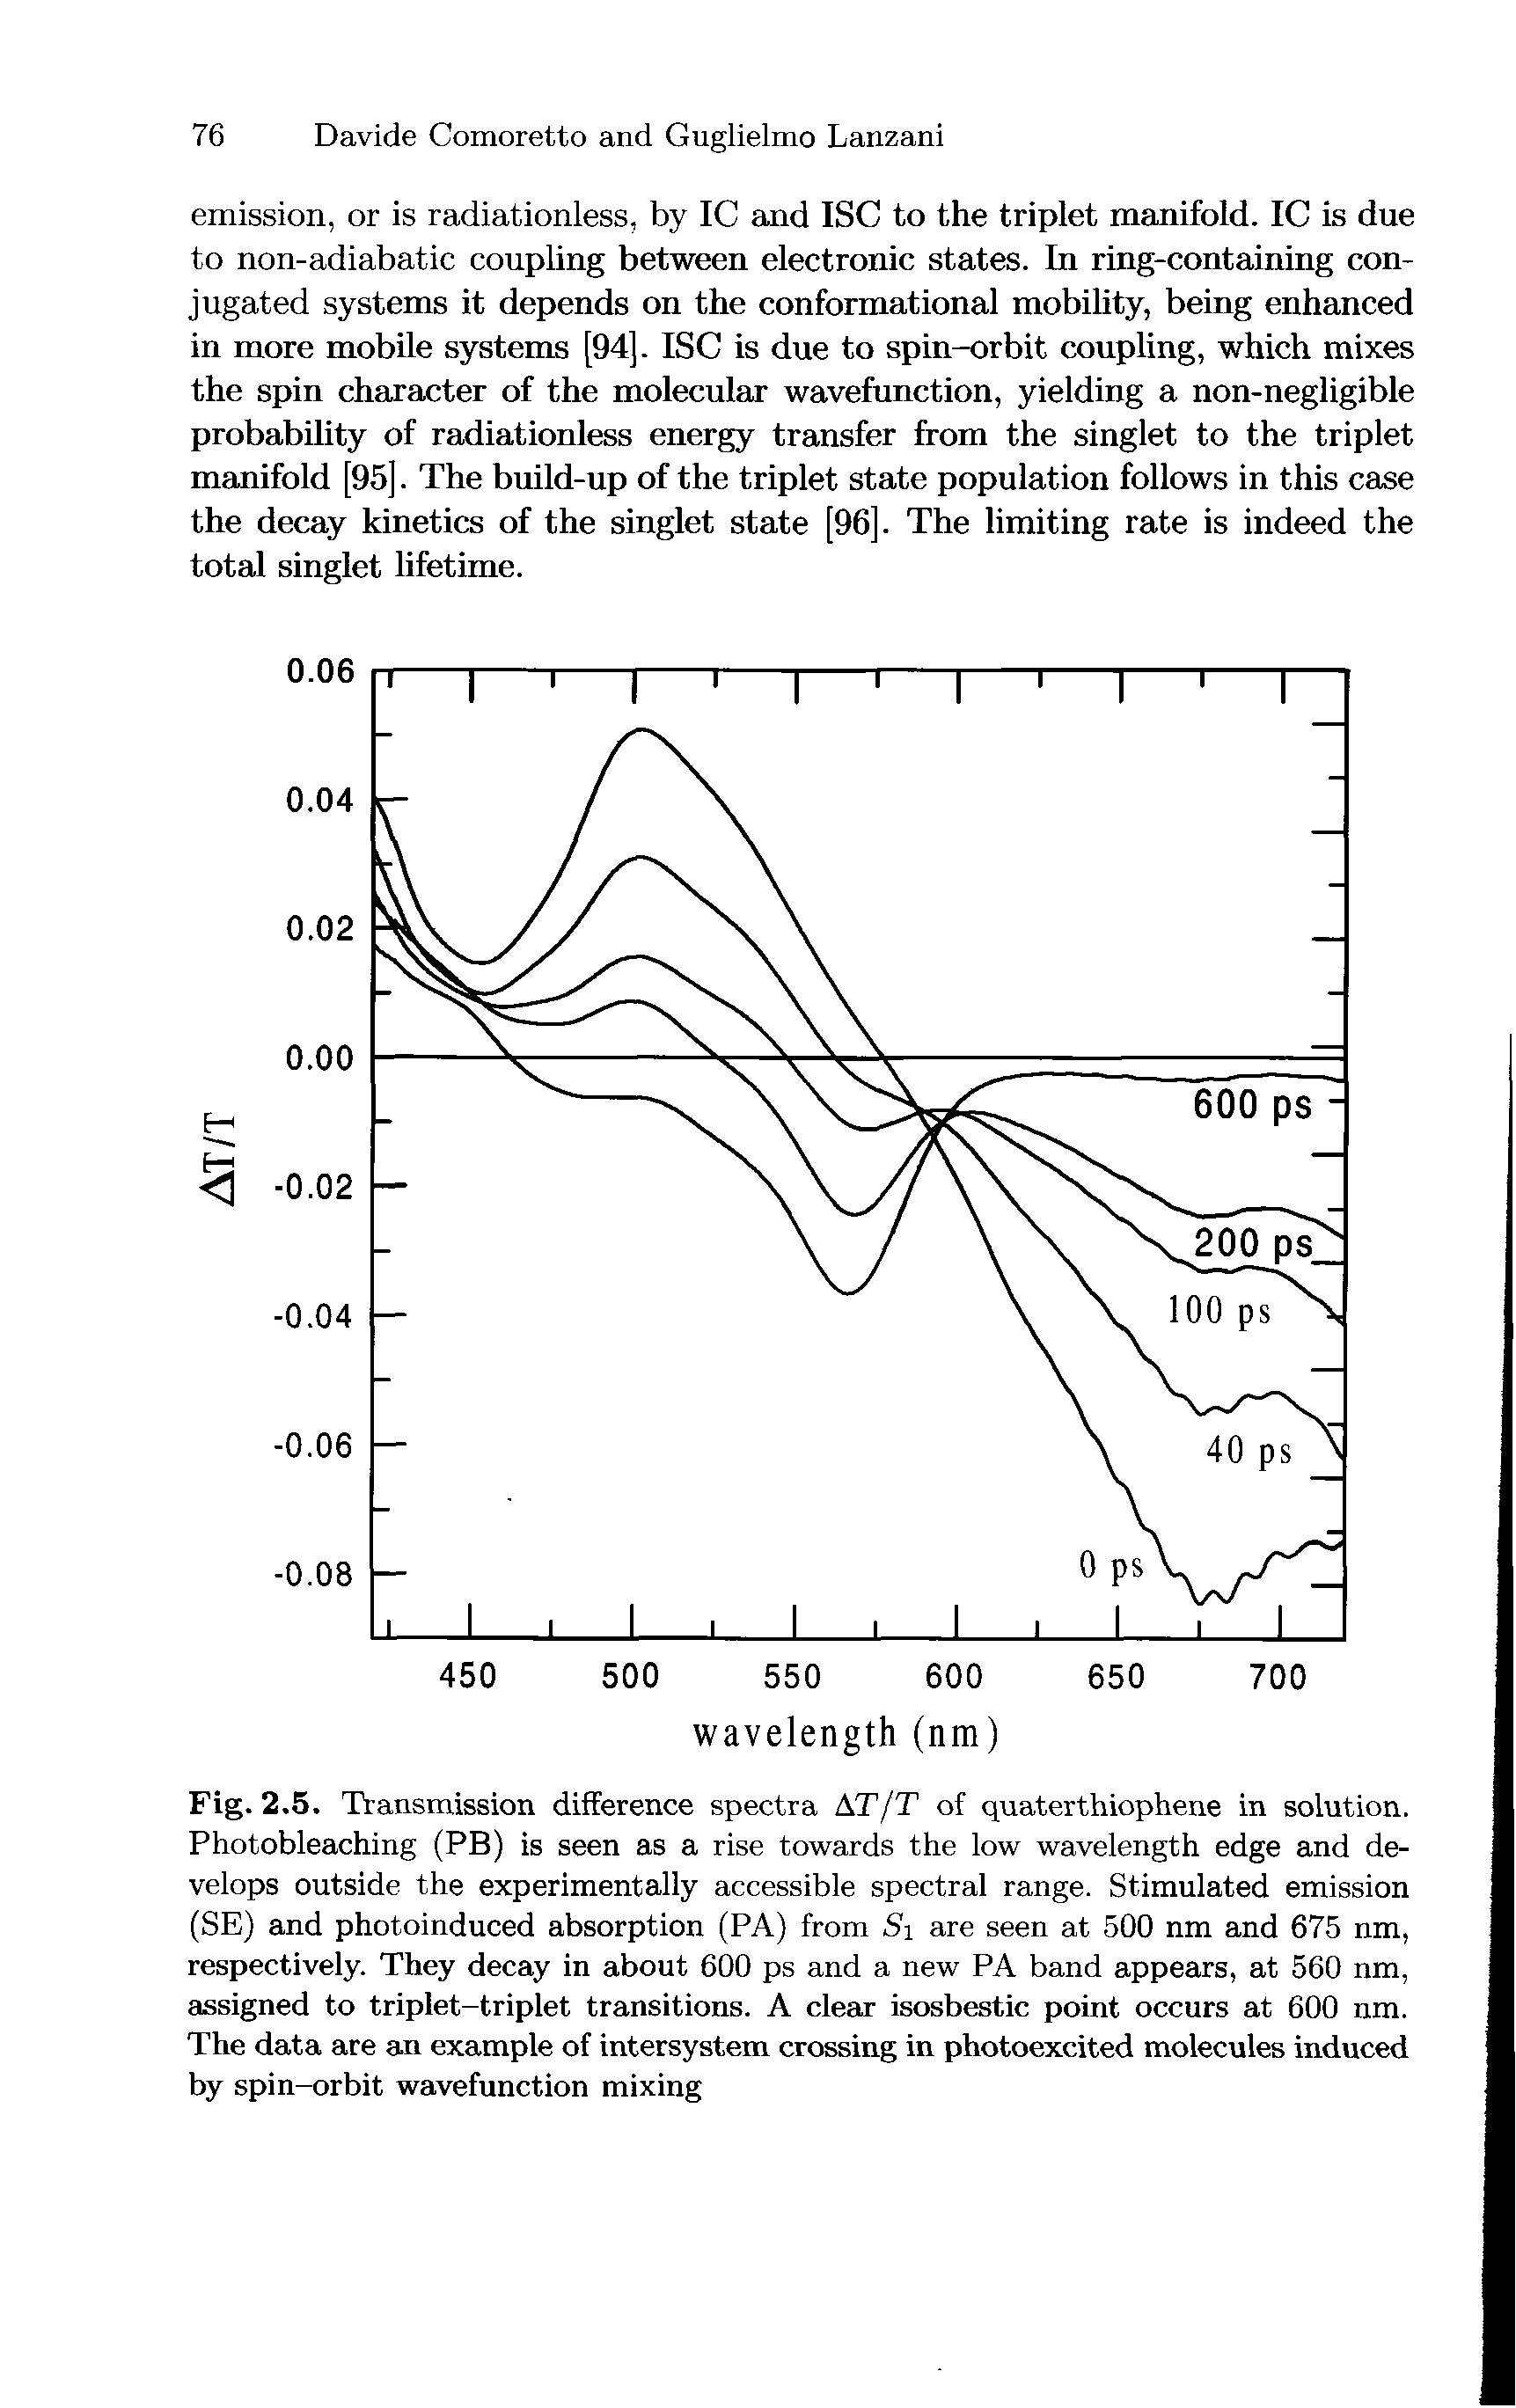 Fig. 2.5. Transmission difference spectra AT/T of quaterthiophene in solution. Photobleaching (PB) is seen as a rise towards the low wavelength edge and develops outside the experimentally accessible spectral range. Stimulated emission (SE) and photoinduced absorption (PA) from Si are seen at 500 nm and 675 nm, respectively. They decay in about 600 ps and a new PA band appears, at 560 nm, assigned to triplet-triplet transitions. A clear isosbestic point occurs at 600 nm. The data are an example of intersystem crossing in photoexcited molecules induced by spin-orbit wavefunction mixing...